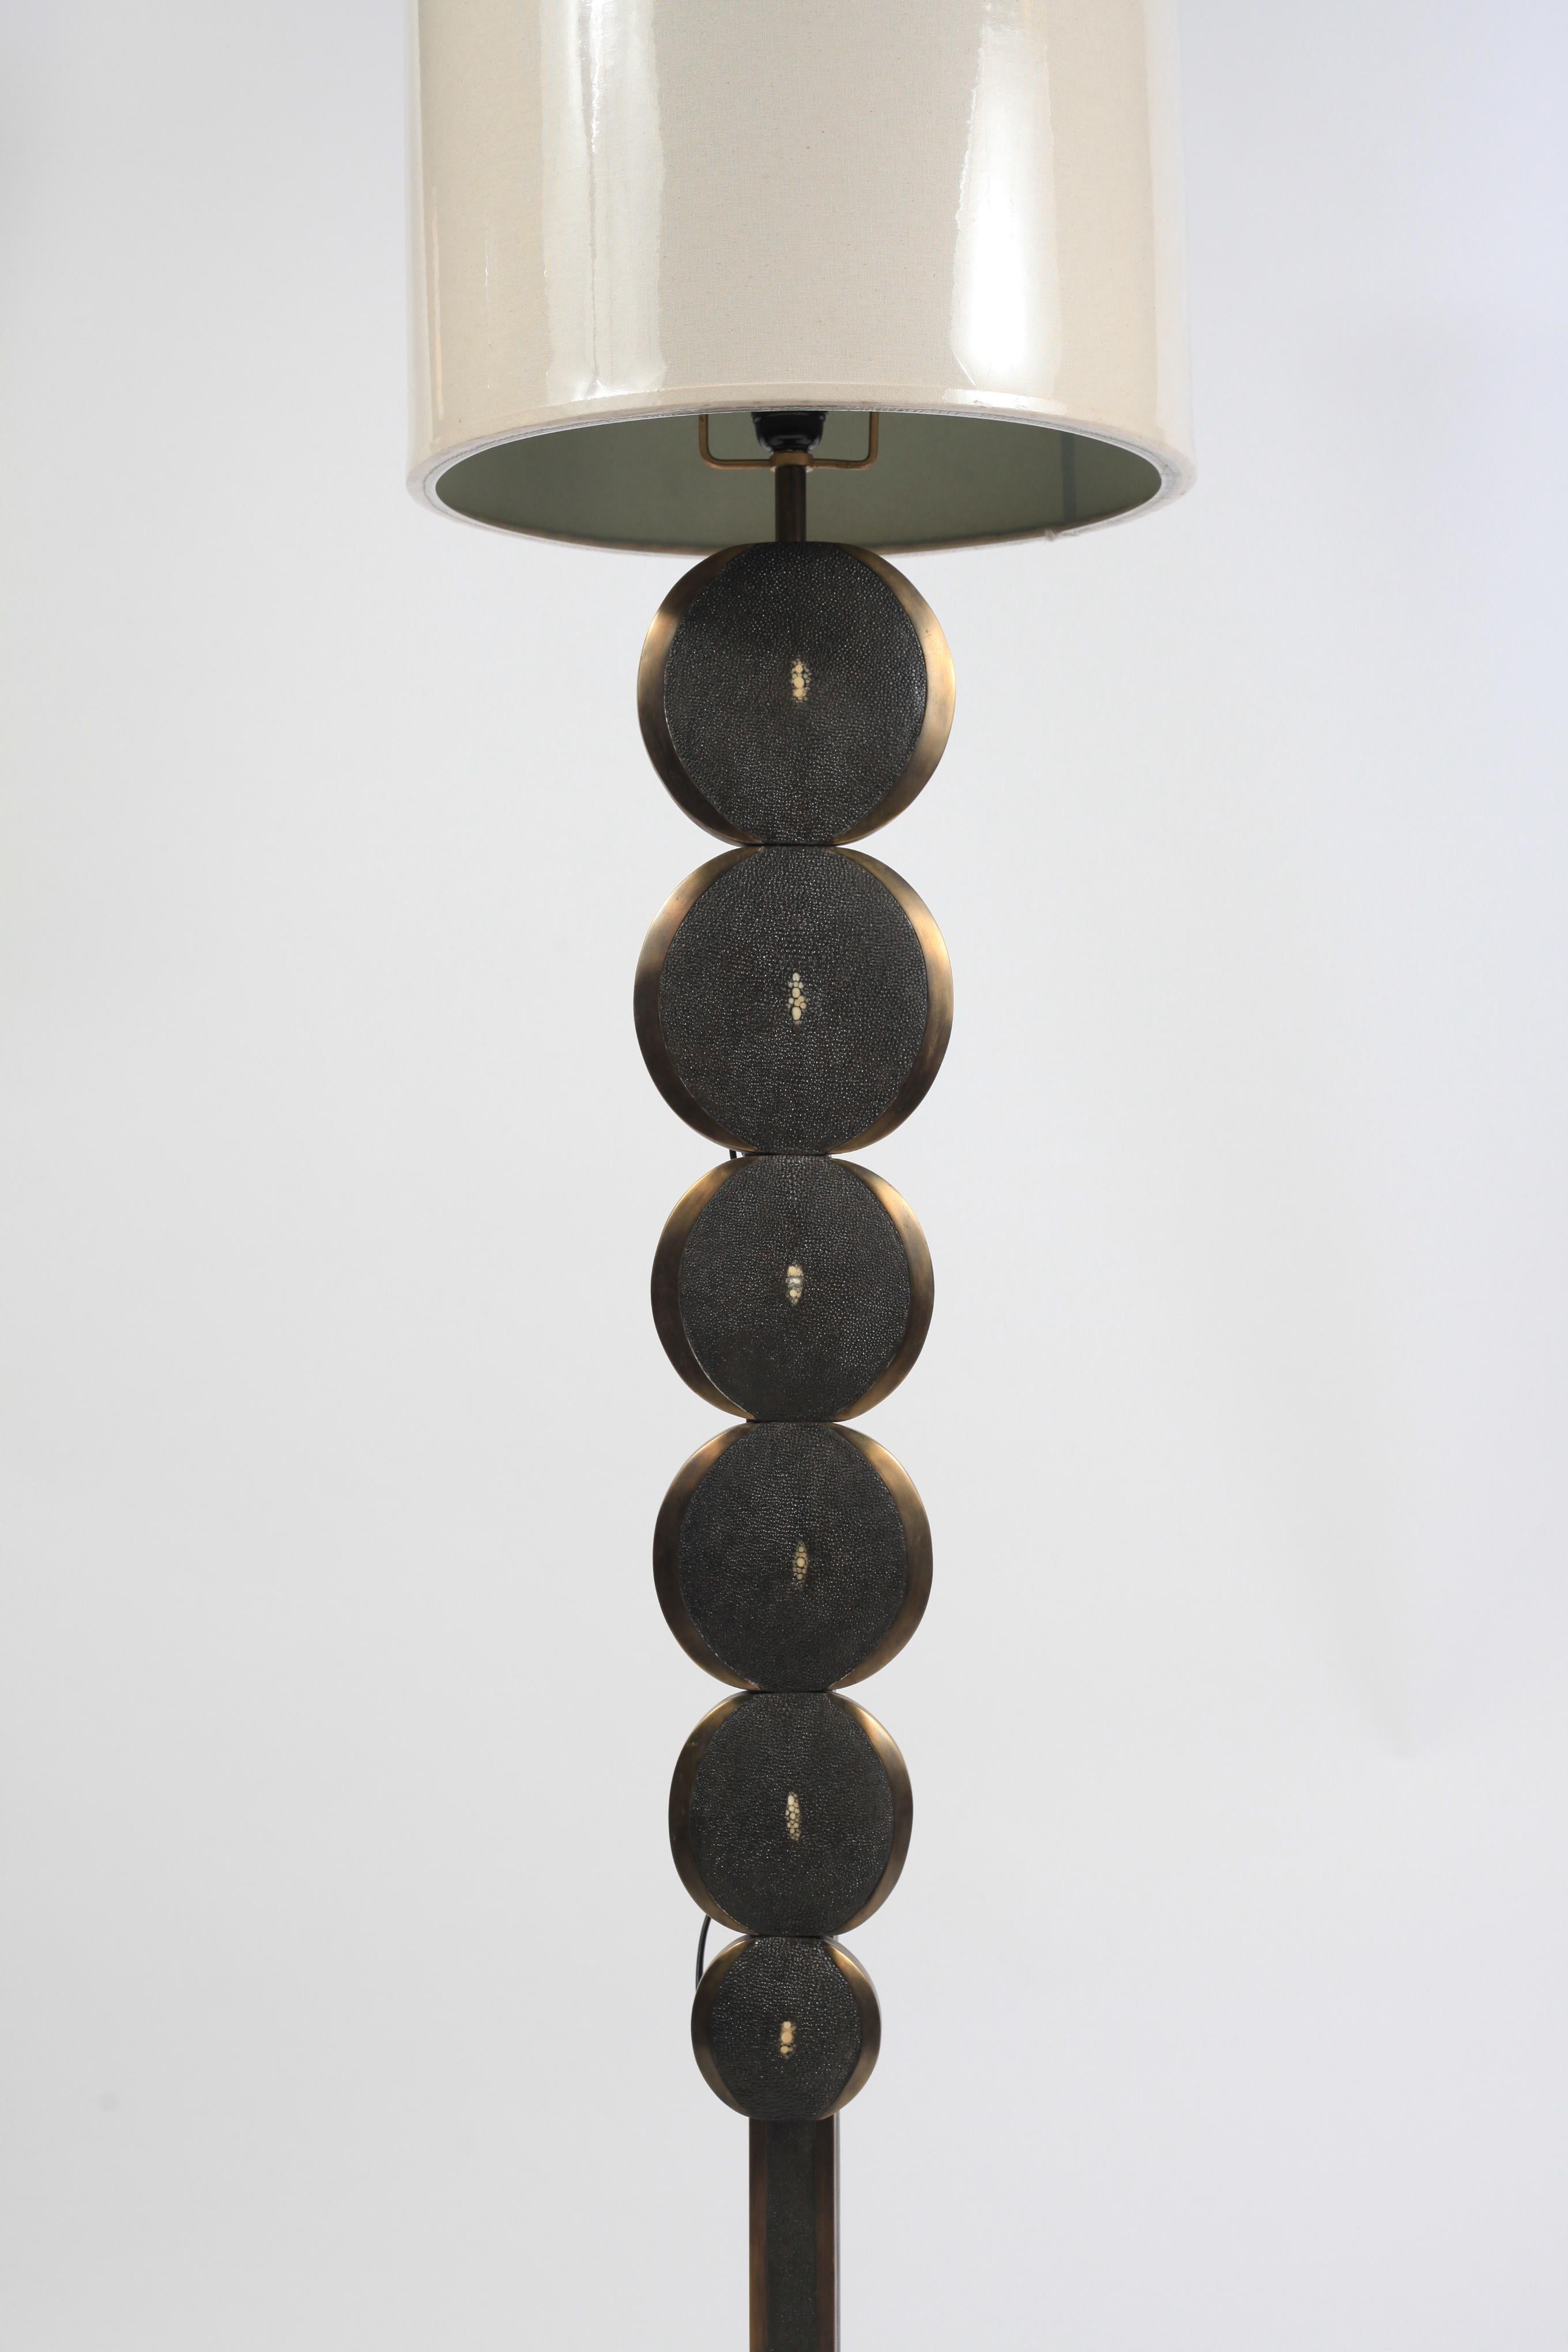 This adjustable floor lamp in coal black Shagreen and bronze patina brass by R&Y Augousti is a sculptural piece with beautiful inlay detailing. This floor lamp features circle parts that gradually increase and are inlaid with a bronze-patina brass